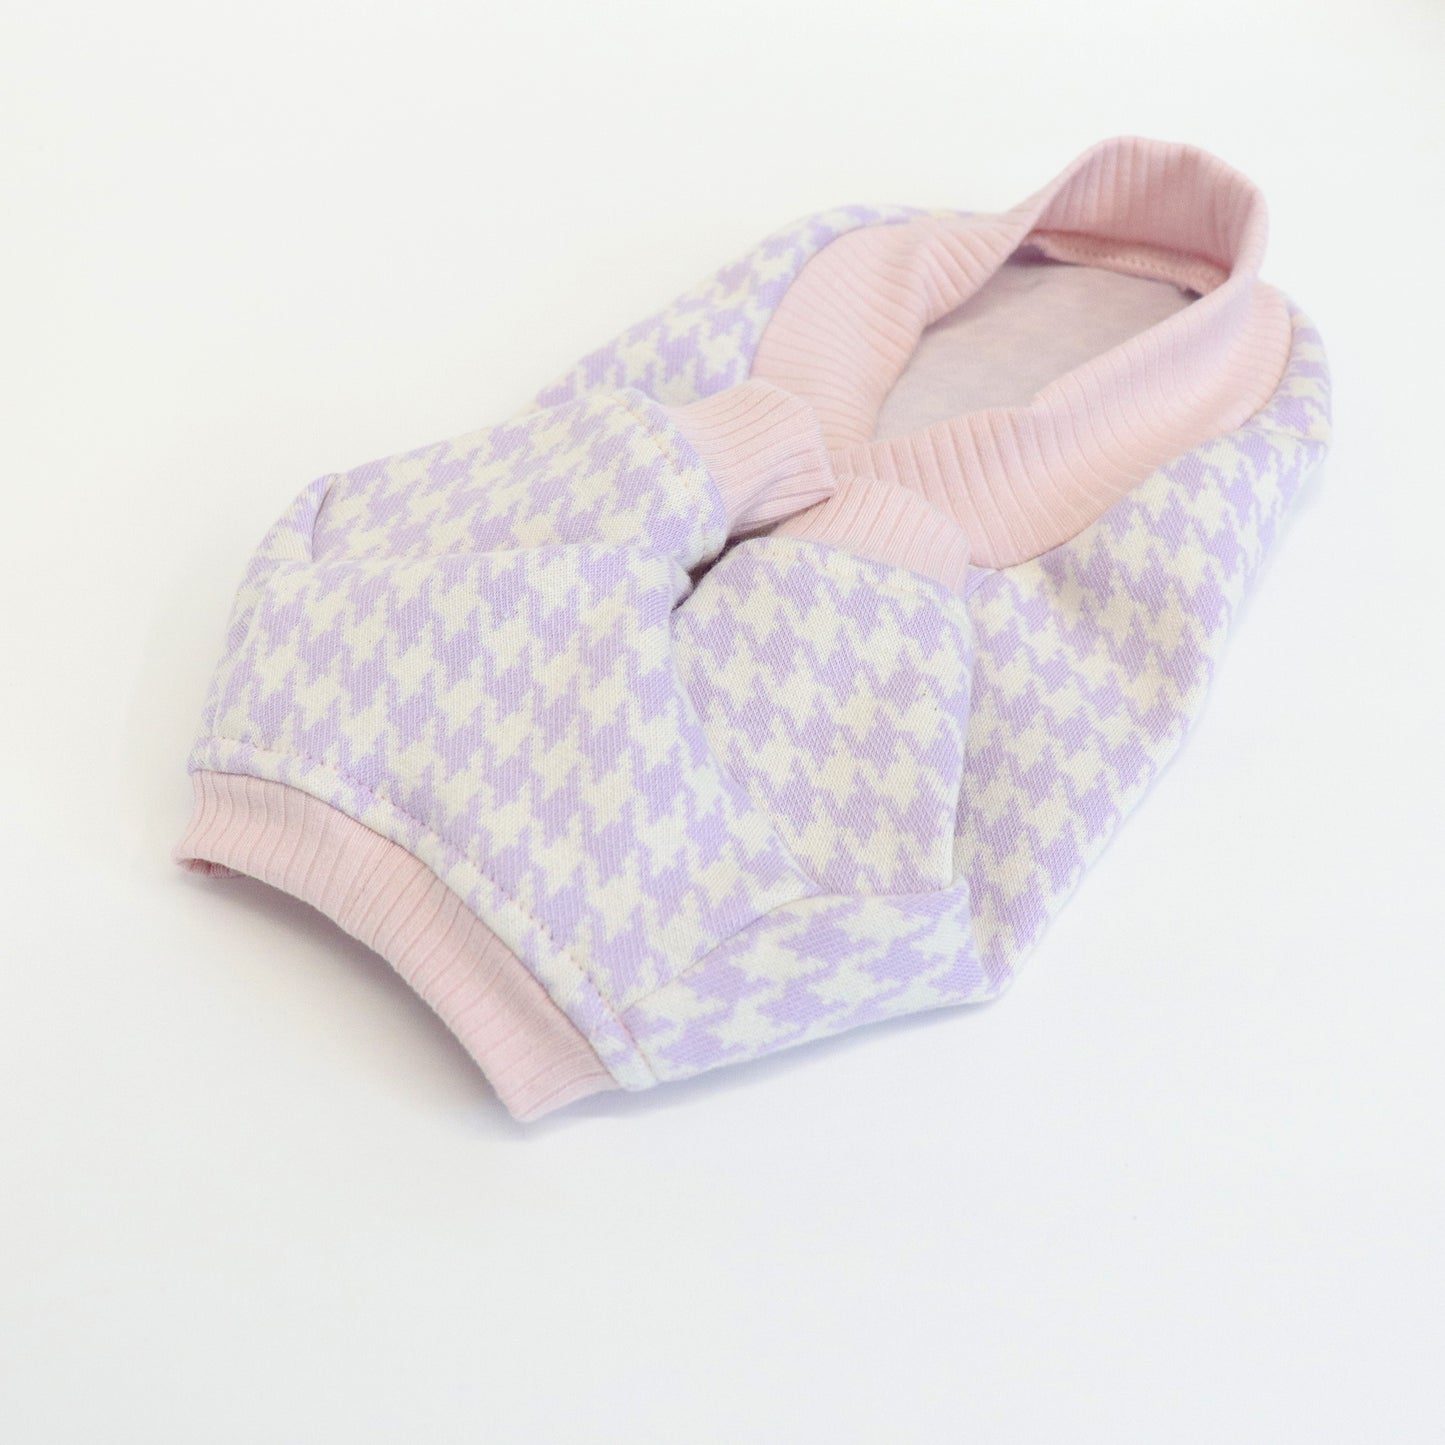 LCB Houndstooth Sweater Top - Lavender